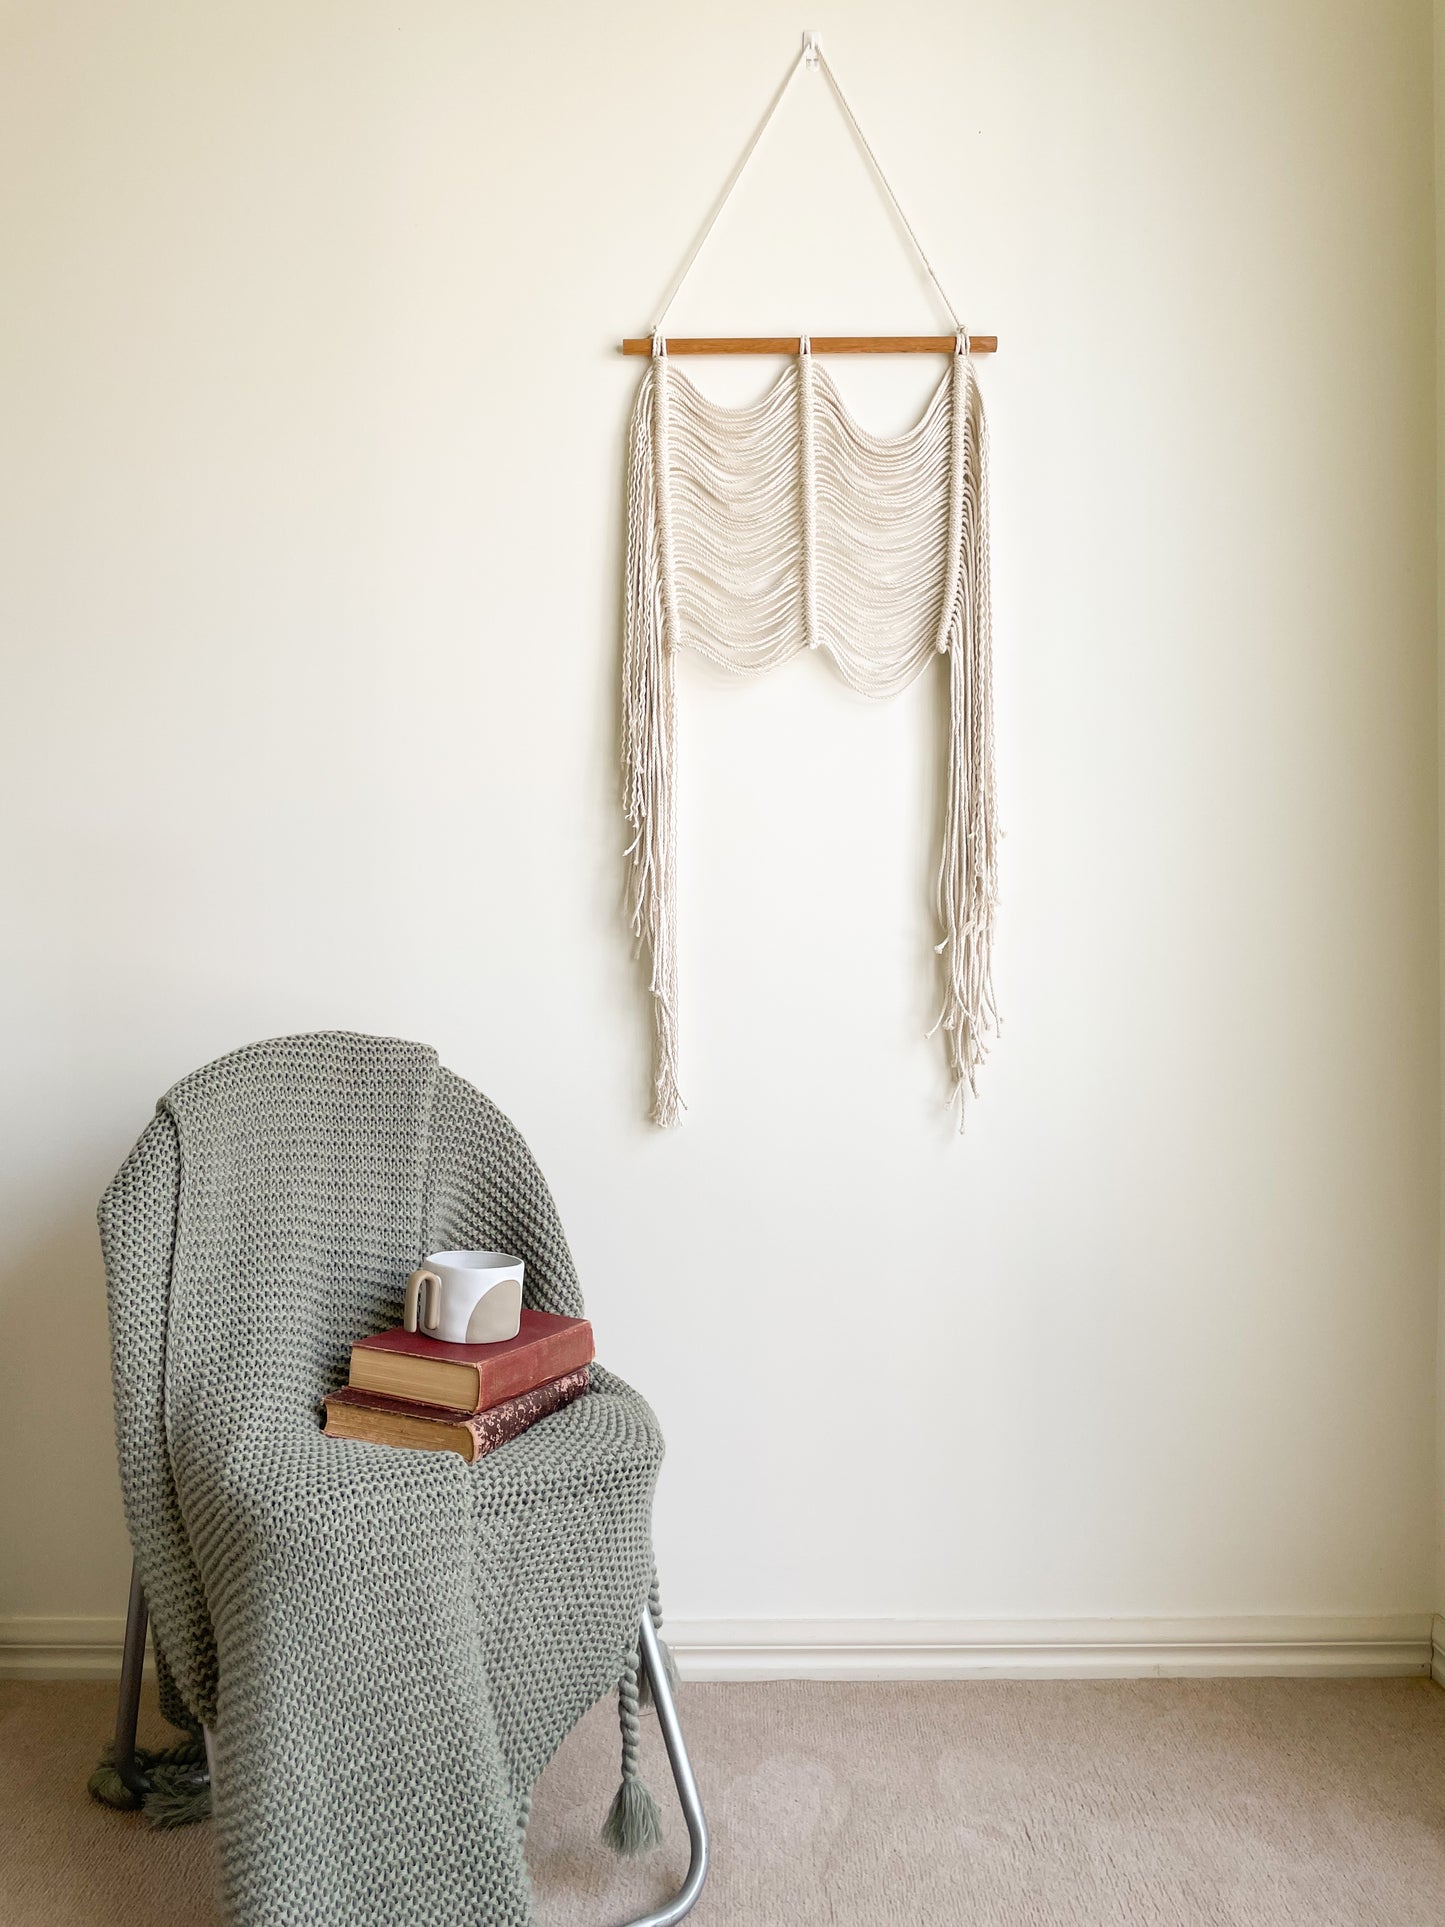 Modern macrame wall hanging hanged on a wall above a chair styled with a throw and vintage books